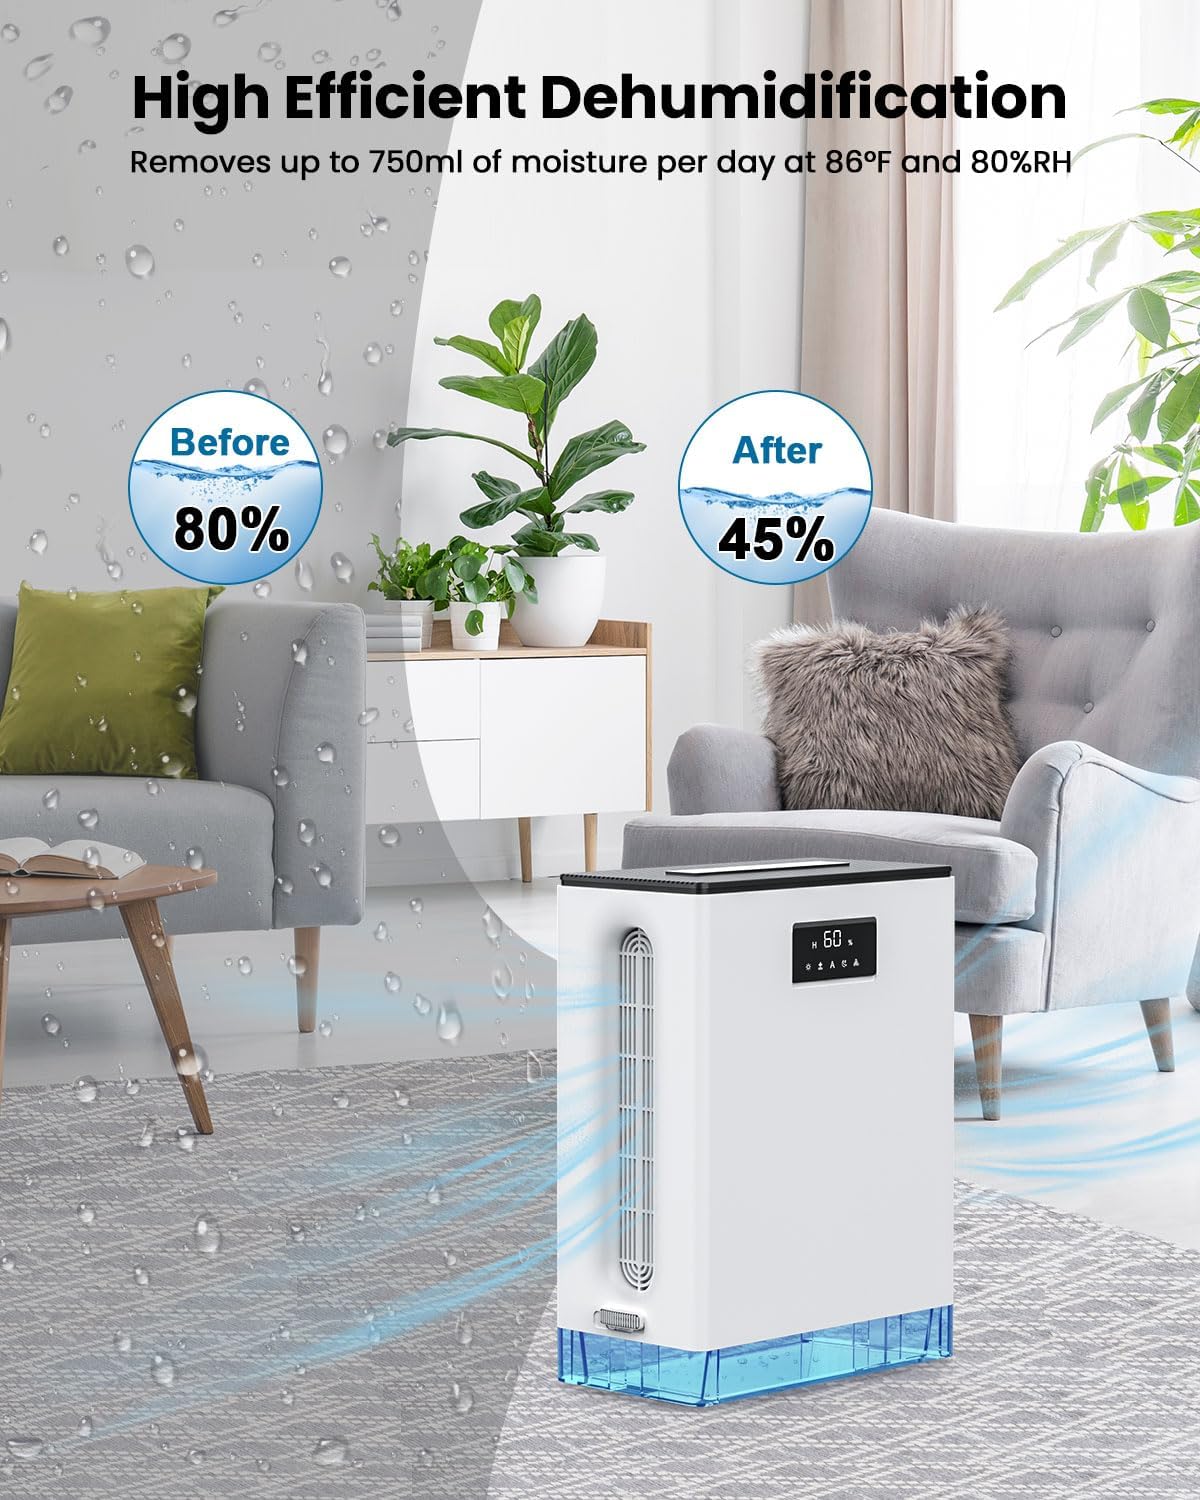 BIZEWO Dehumidifier for Home, 101 oz Water Tank, (950 sq. ft) Dehumidifiers for Basement, Bathroom, Bedroom with Auto Shut Off